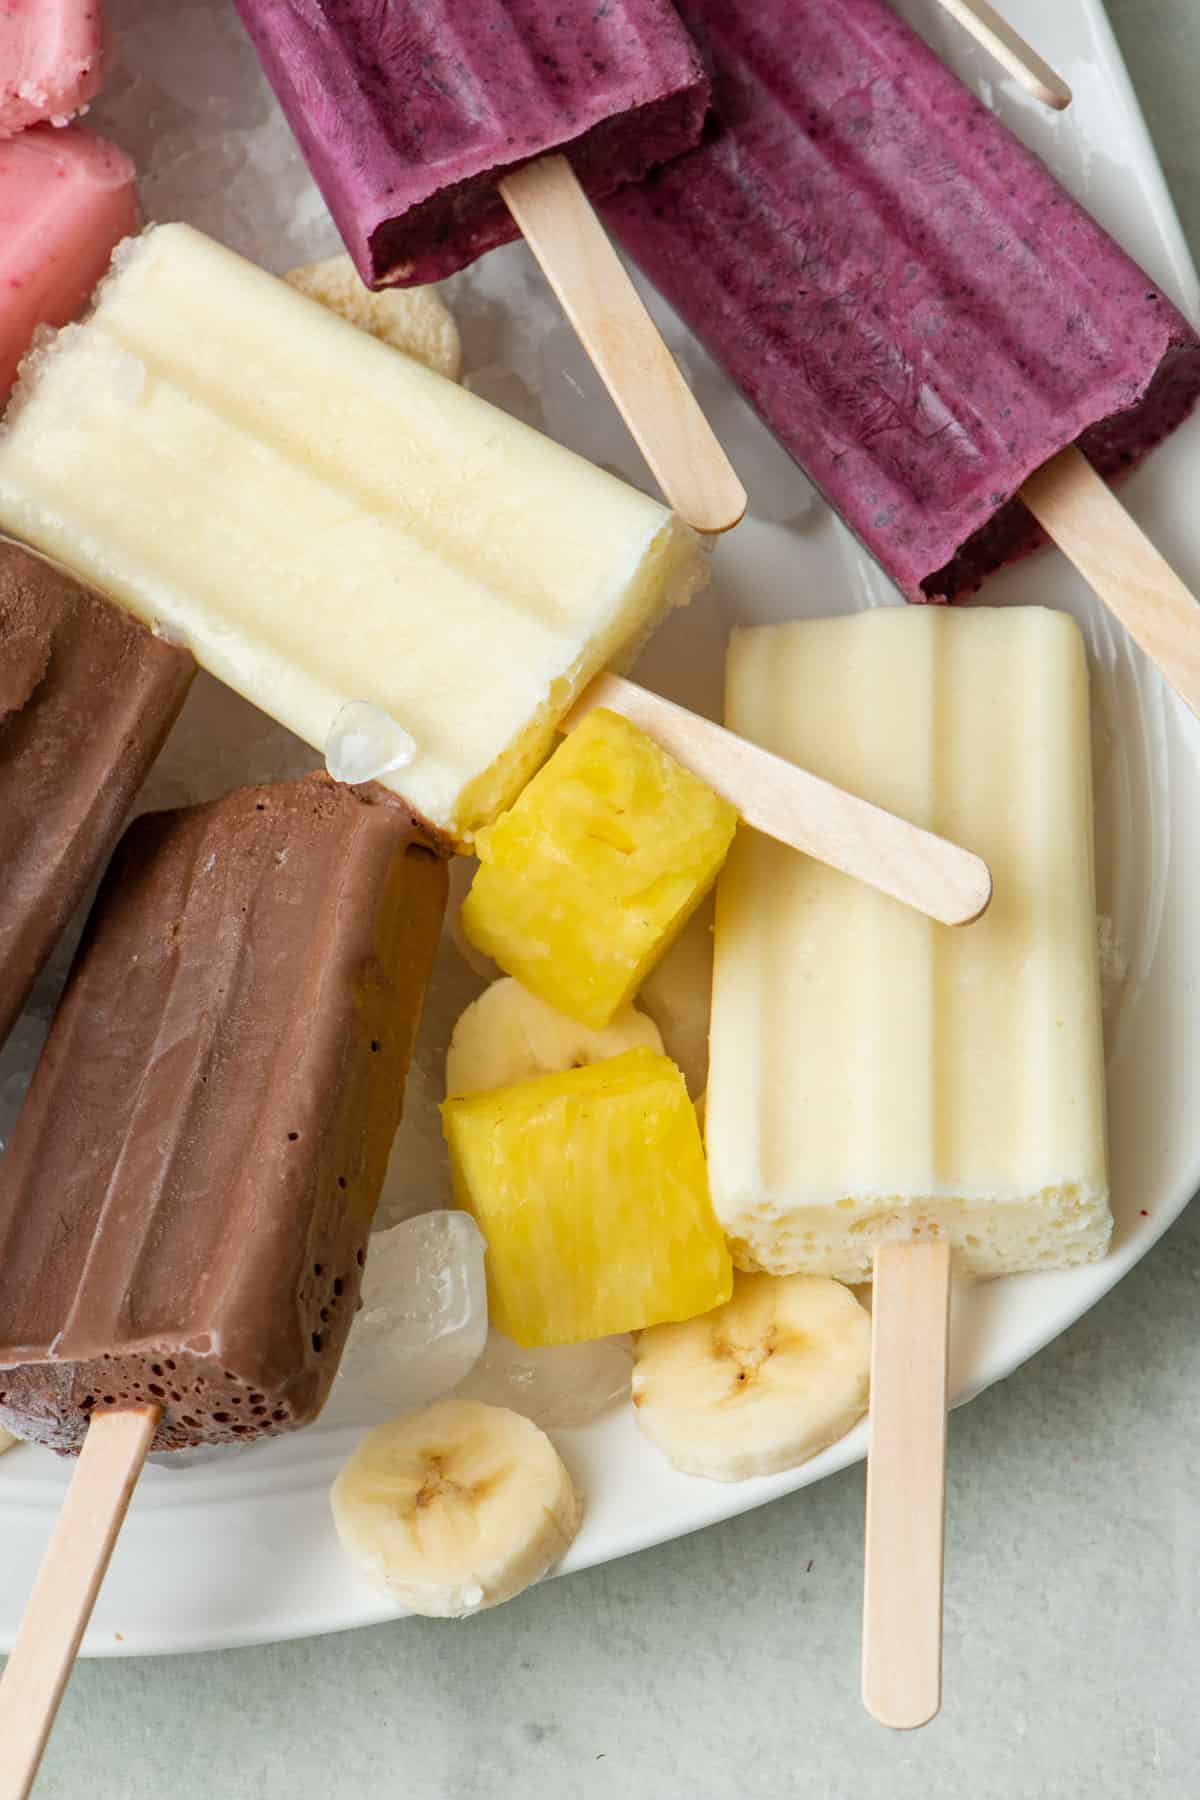 Frozen pineapple yogurt popsicles on a tray of ice with extra pineapple chunks around.